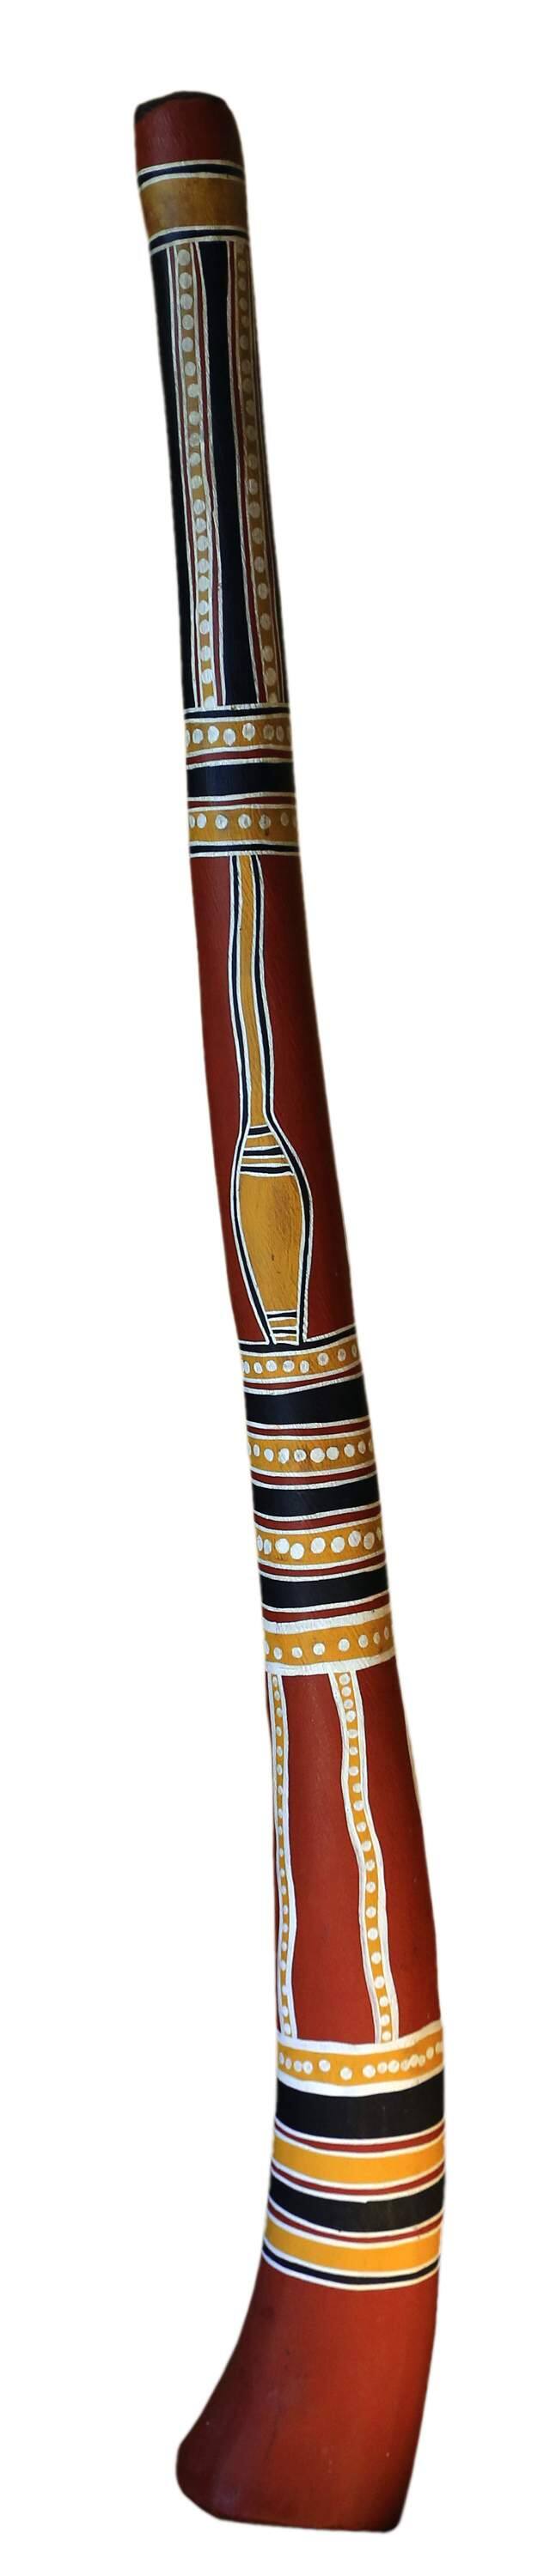 You Built What?! The Electronic Didgeridoo